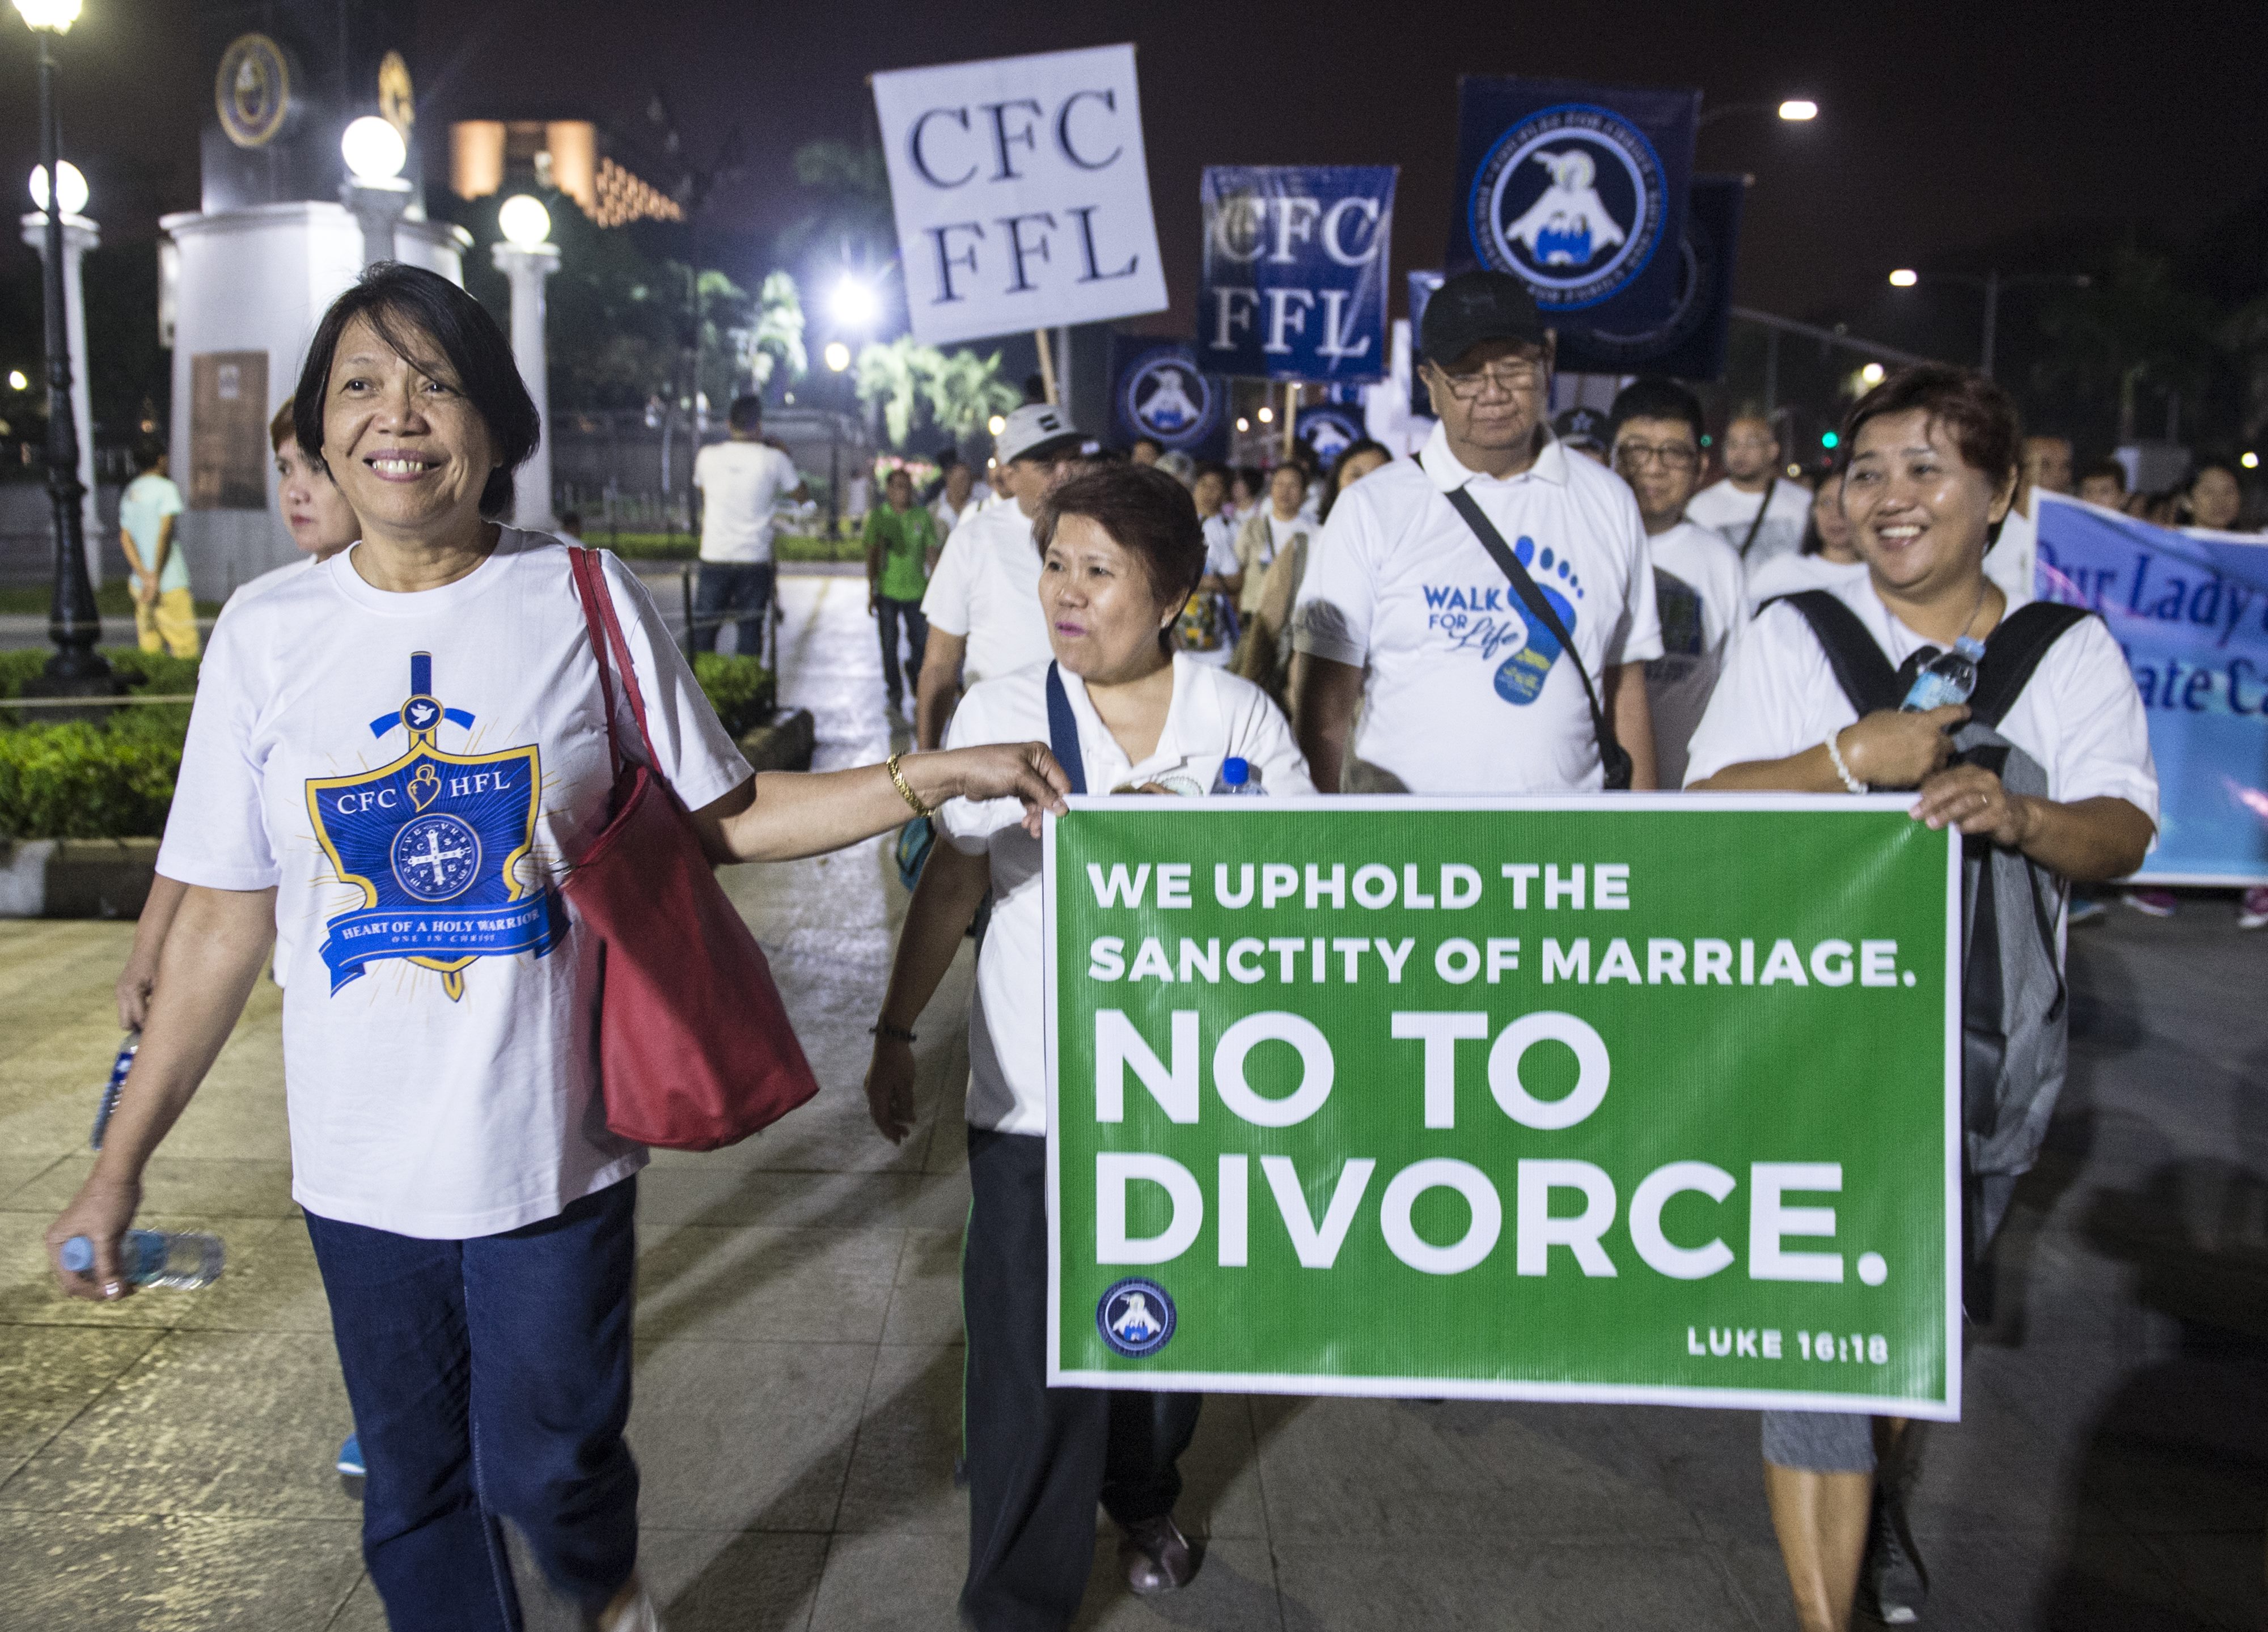 Catholic protestors carry signs at a "march for life" to oppose a bill legalizing divorce in Manila, Philippines on Feb. 24, 2018. (Ted Aljibe—AFP/Getty Images)